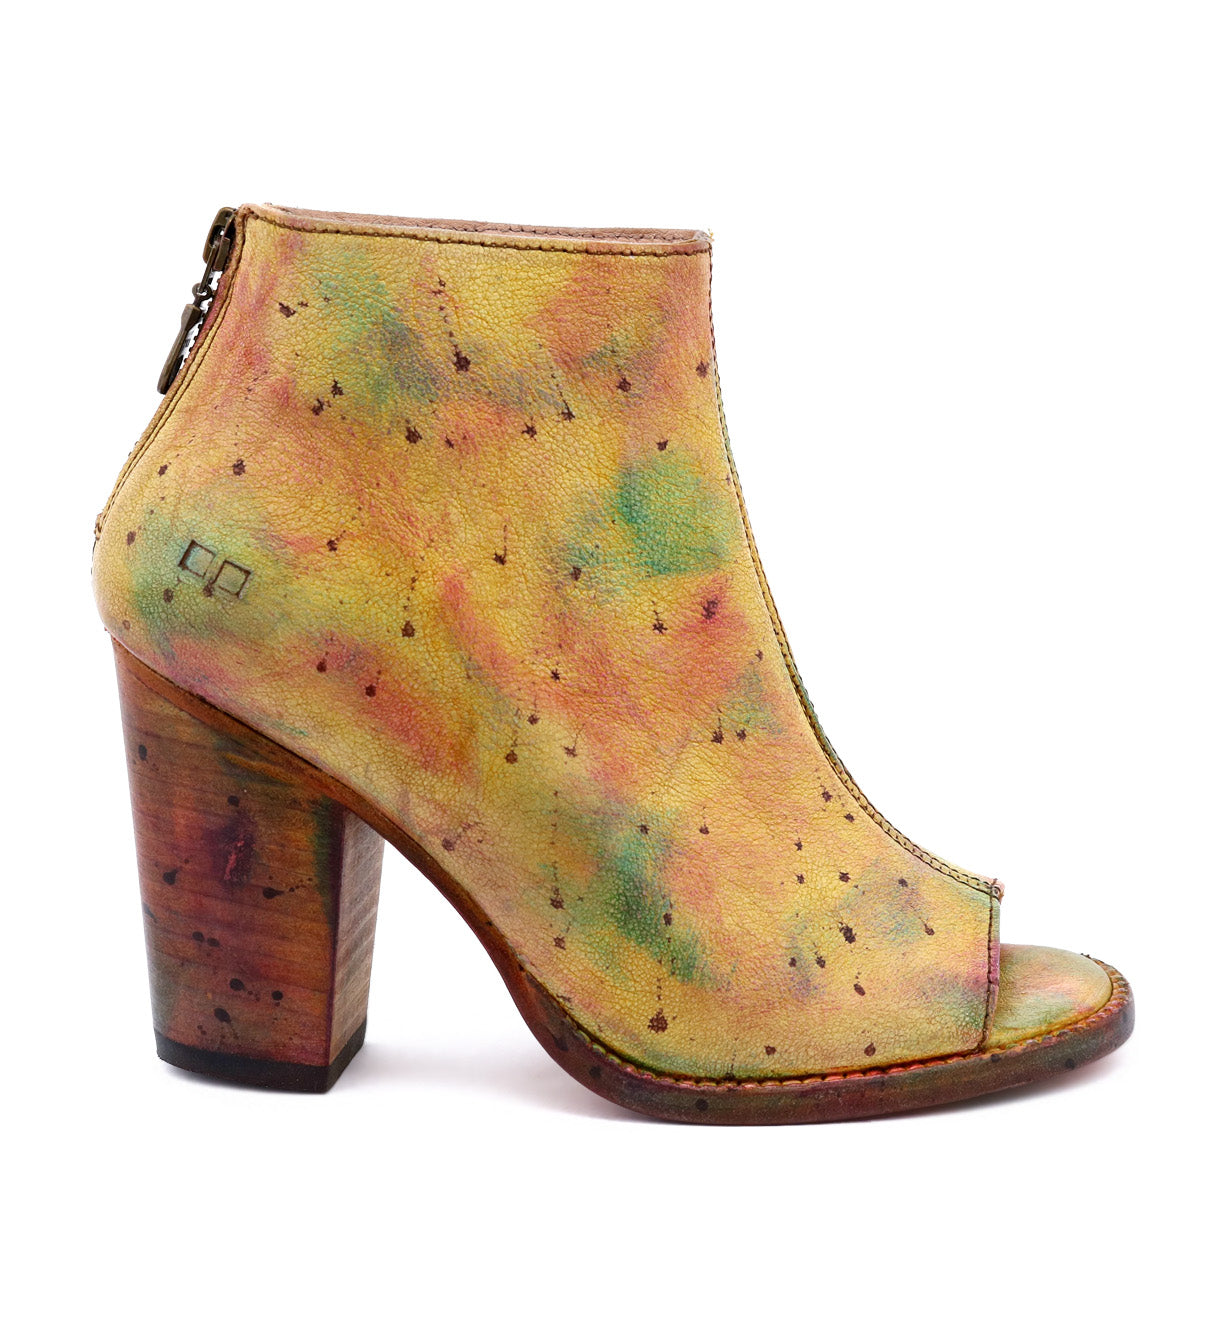 A women's ankle boot with colorful paint on it called the Onset by Bed Stu.